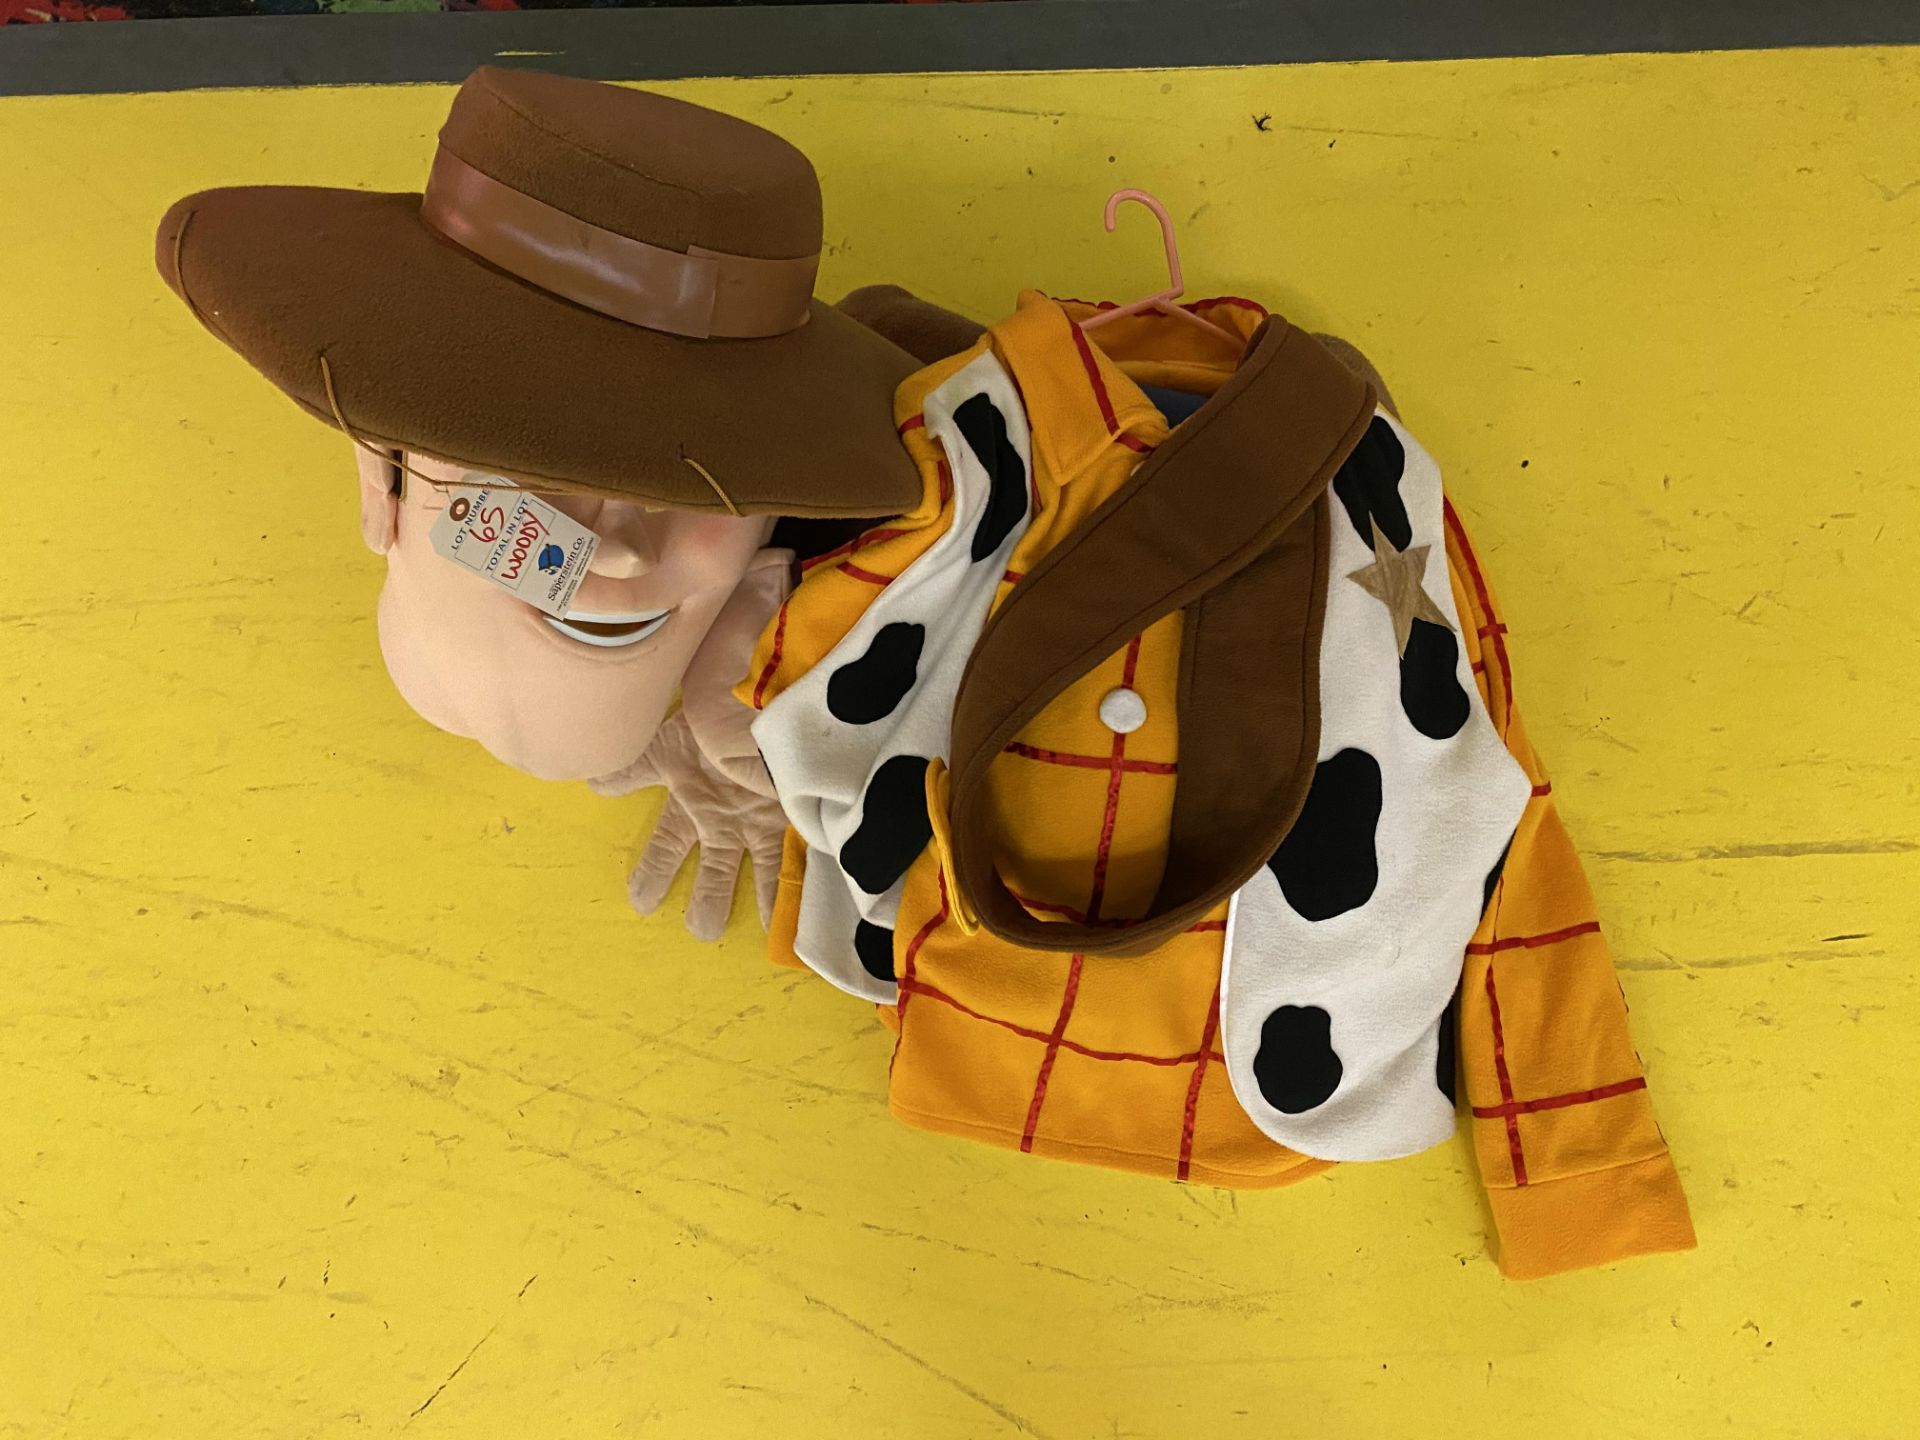 Costume Character Suit Toy Story Woody - Image 2 of 2